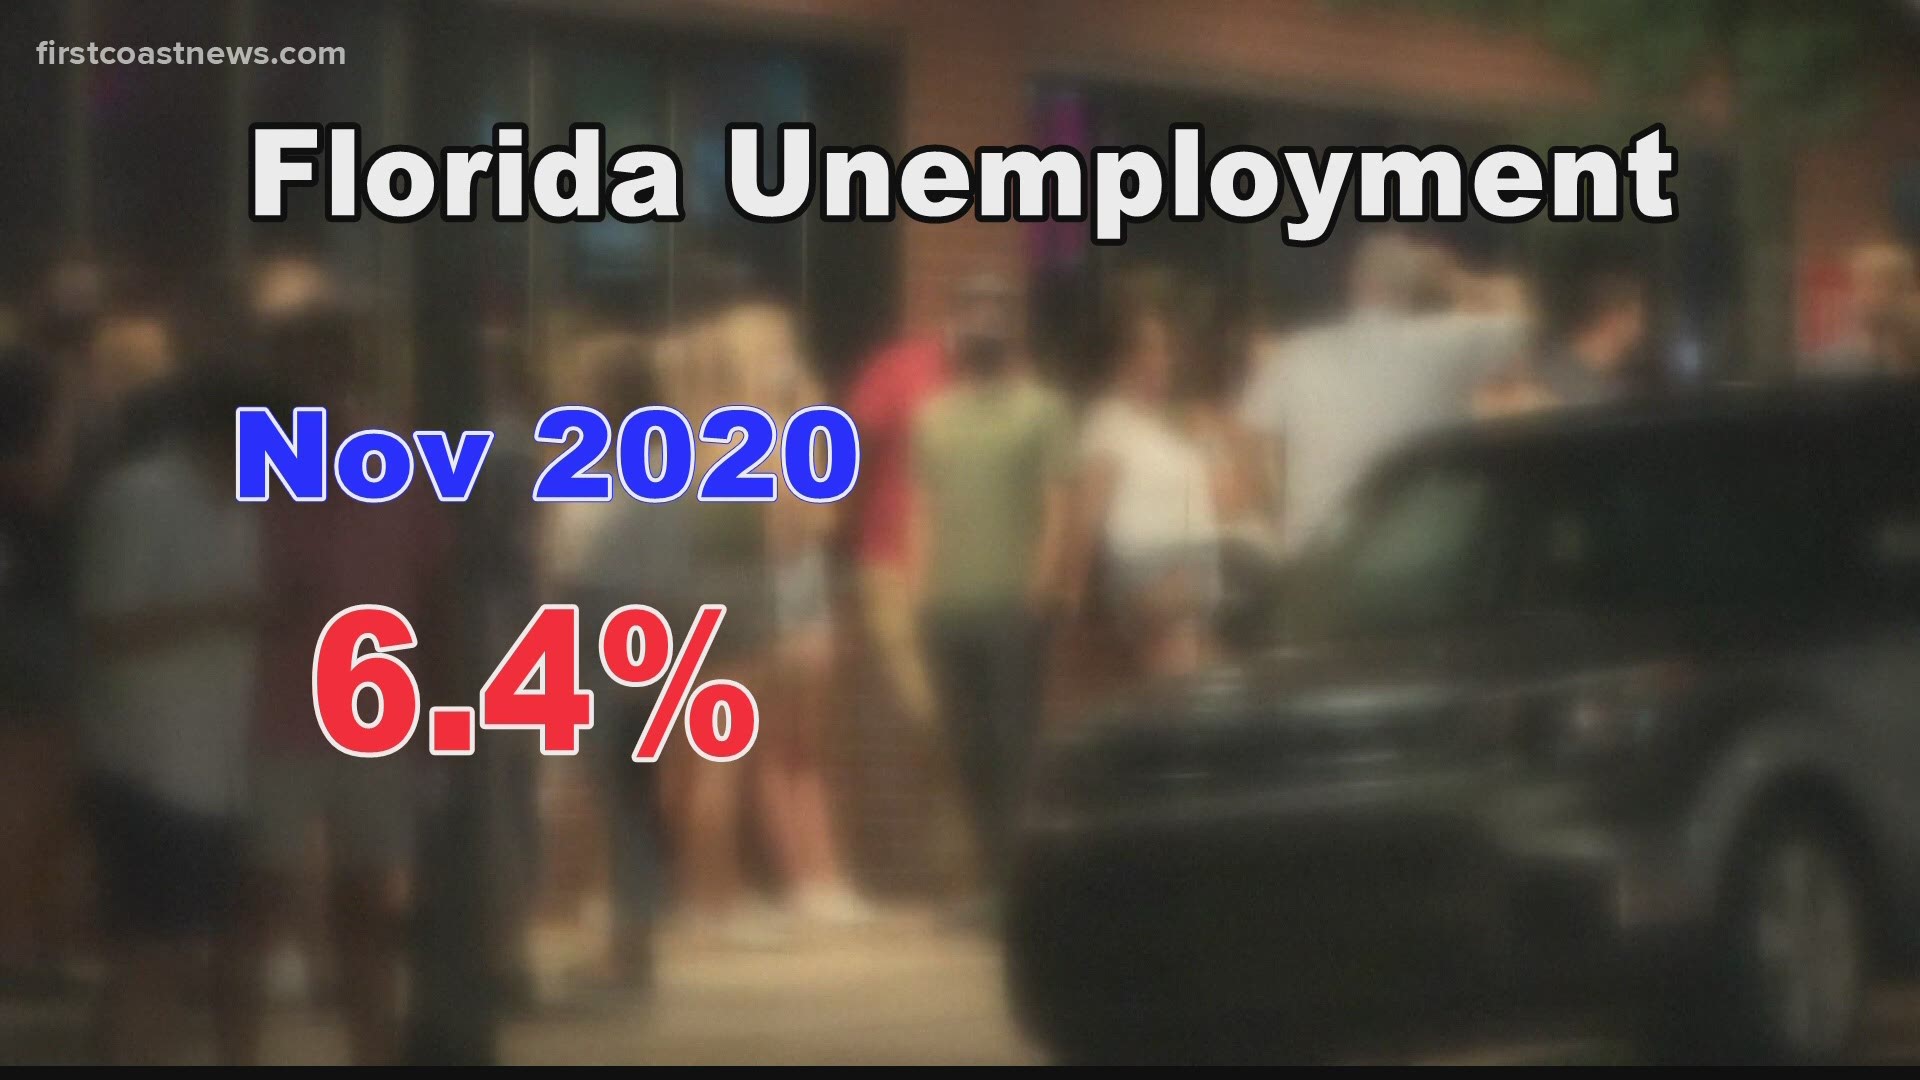 Florida’s 6.4 percent unemployment rate is a big recovery compared to the pandemic high of 13.8 percent in April.